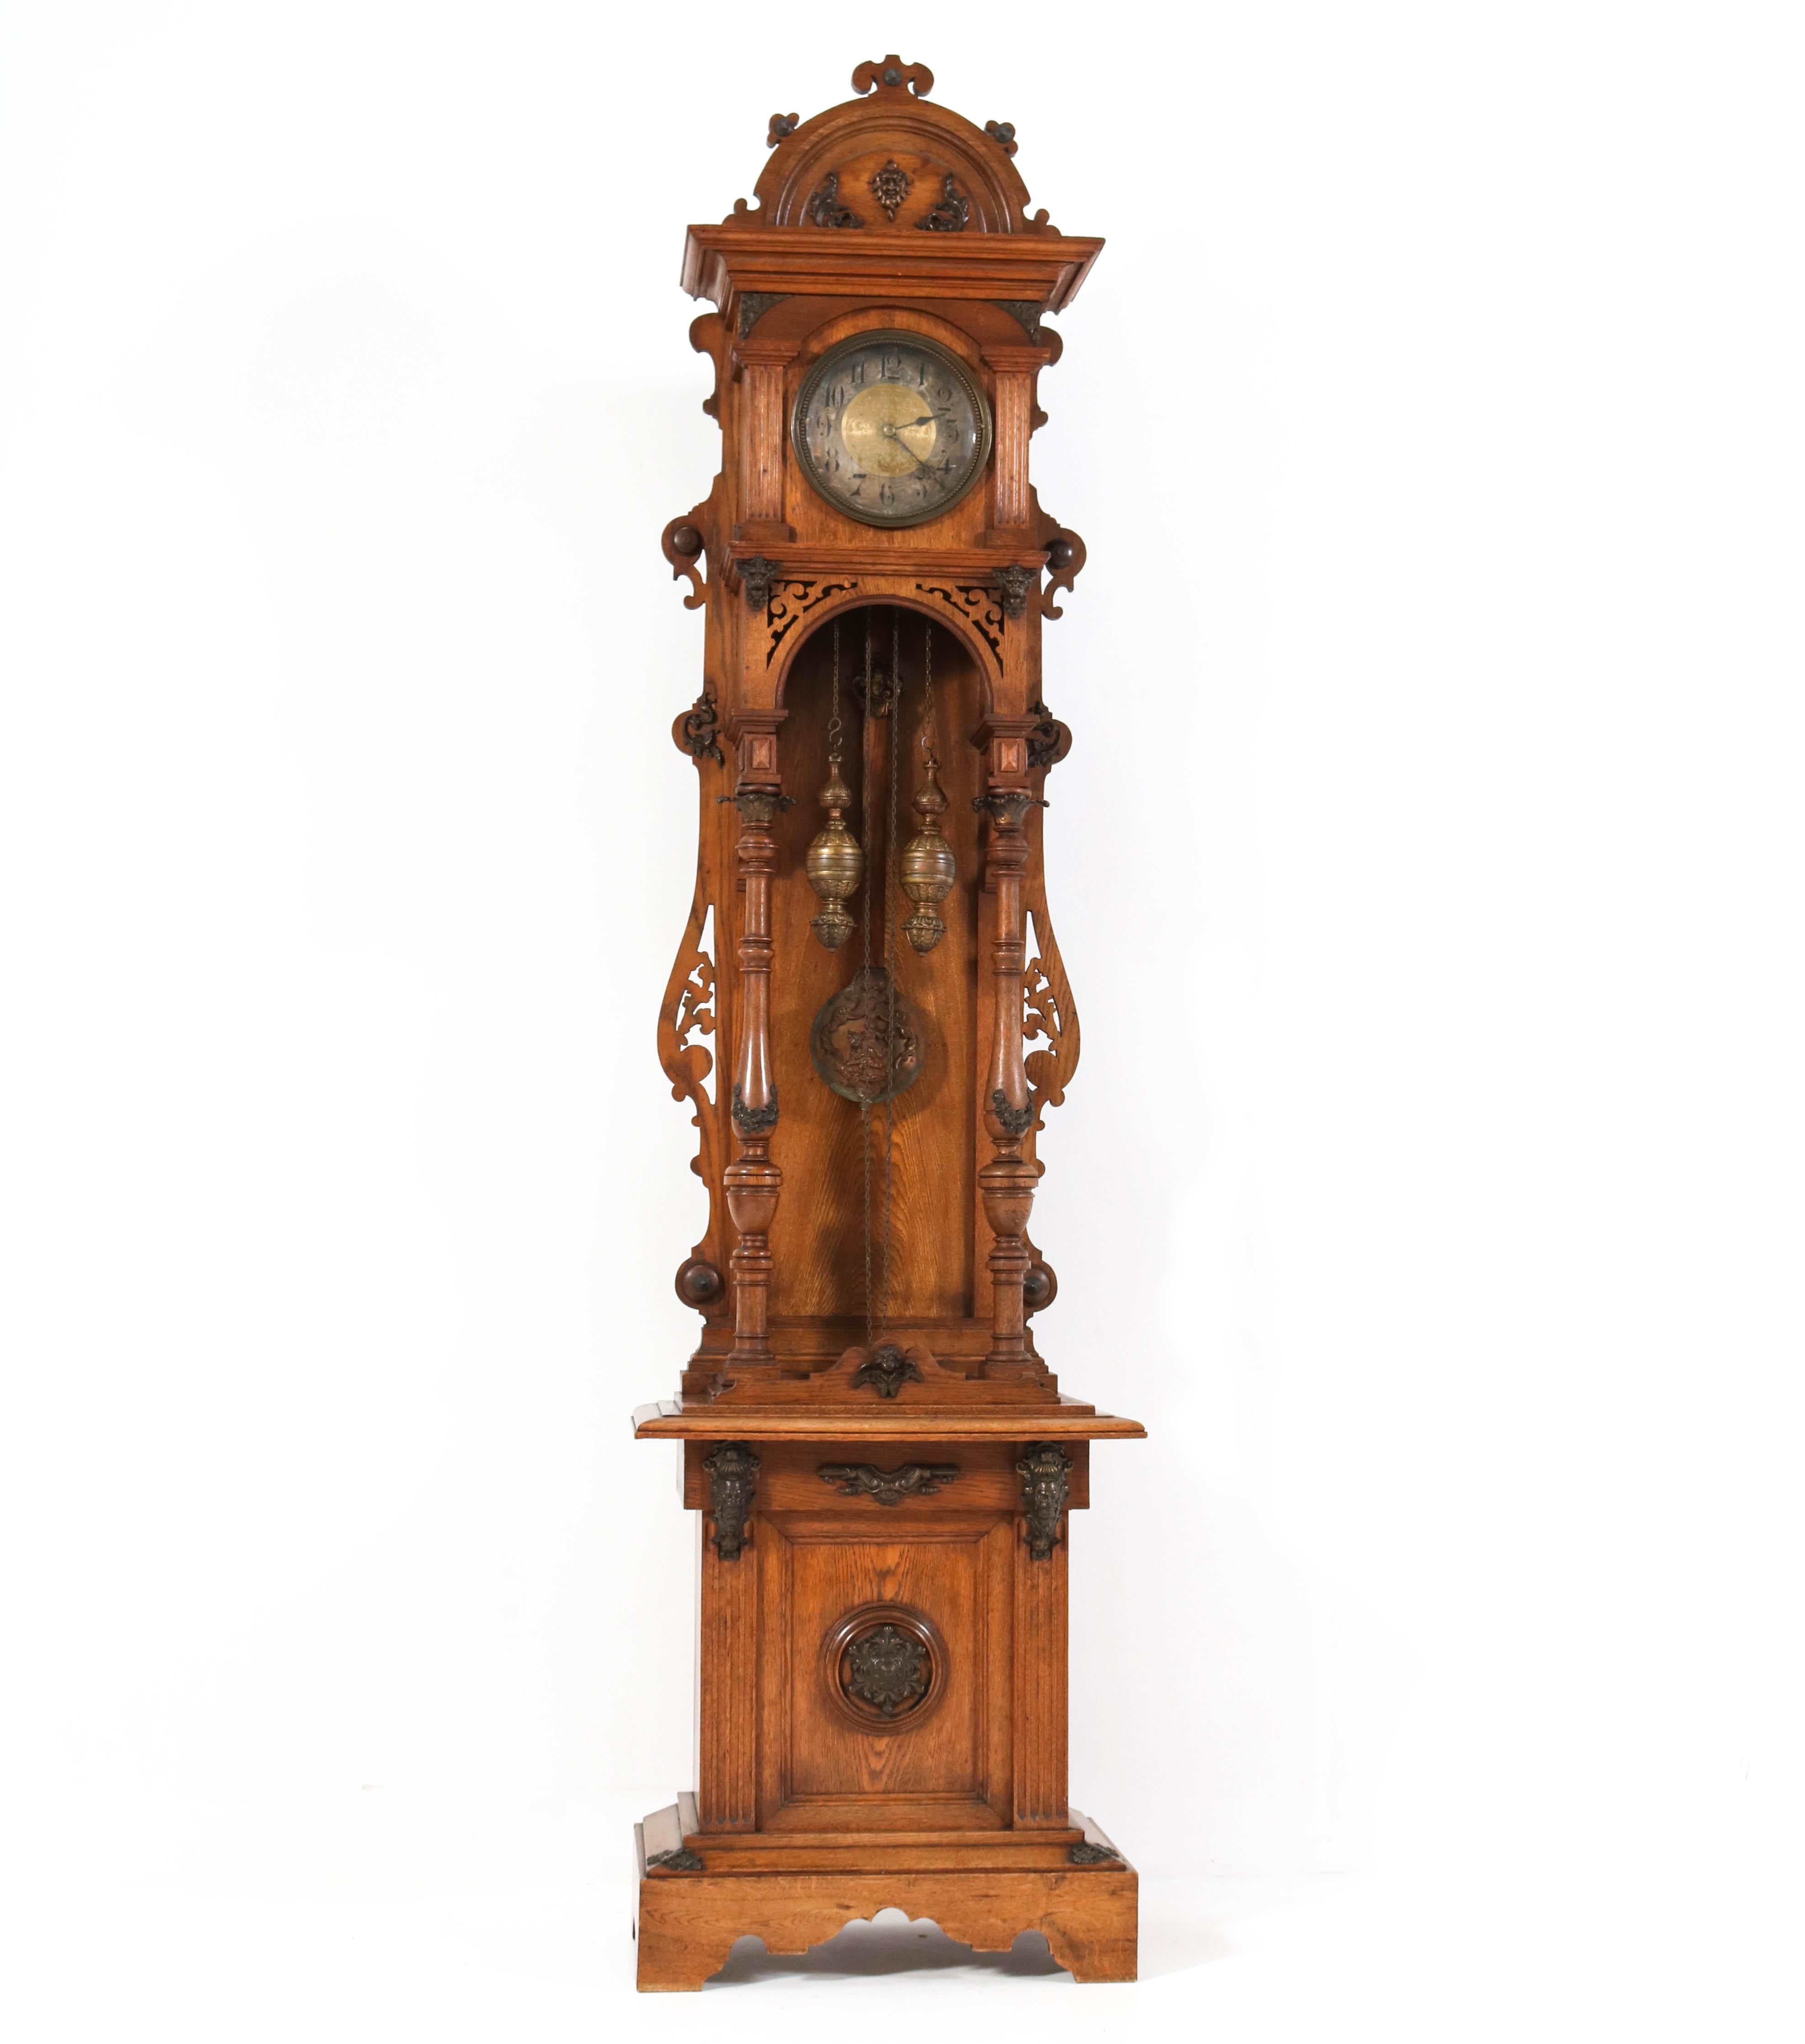 Magnificent and rare Gründerzeit Grandfather clock.
Striking German design from the 1880s.
Solid oak open ornate case.
Weight-driven movement.
Ornate brass weights.
Nice hand-made carving and brass decorations.
In very good original condition